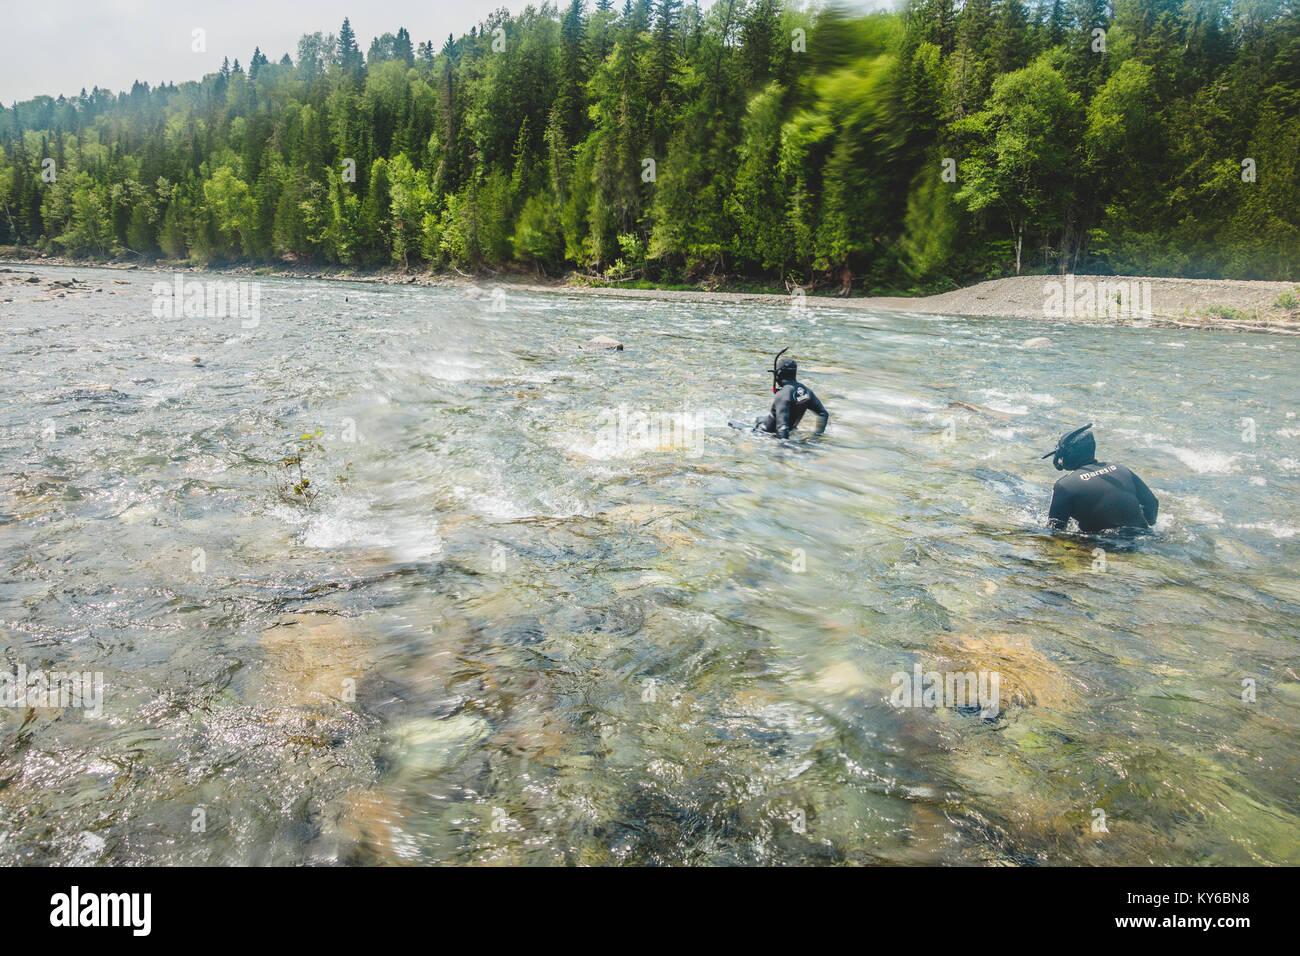 BONAVENTURE, CANADA   JULY 19, 2017. Couple Taking a Snorkeling Break and Looking on the Best Way to go to Avoid Rocks in the Strong River Current Stock Photo